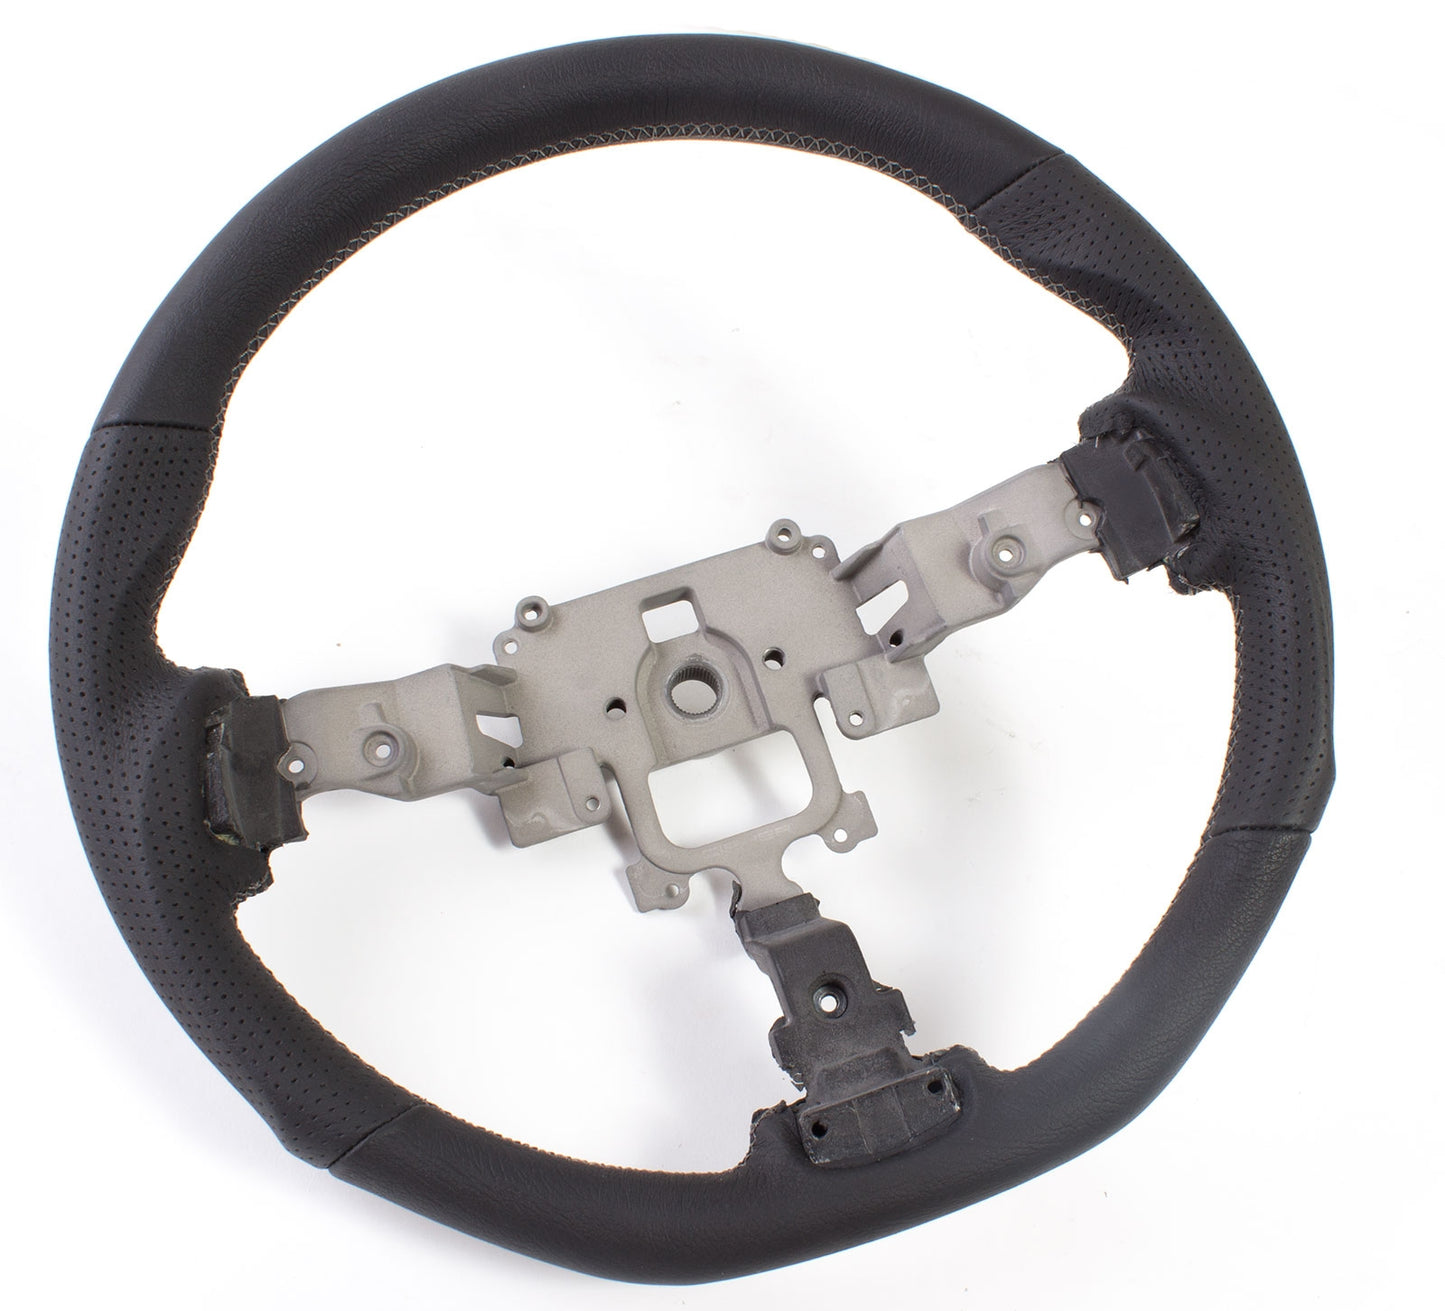 Cipher steering wheel for NC